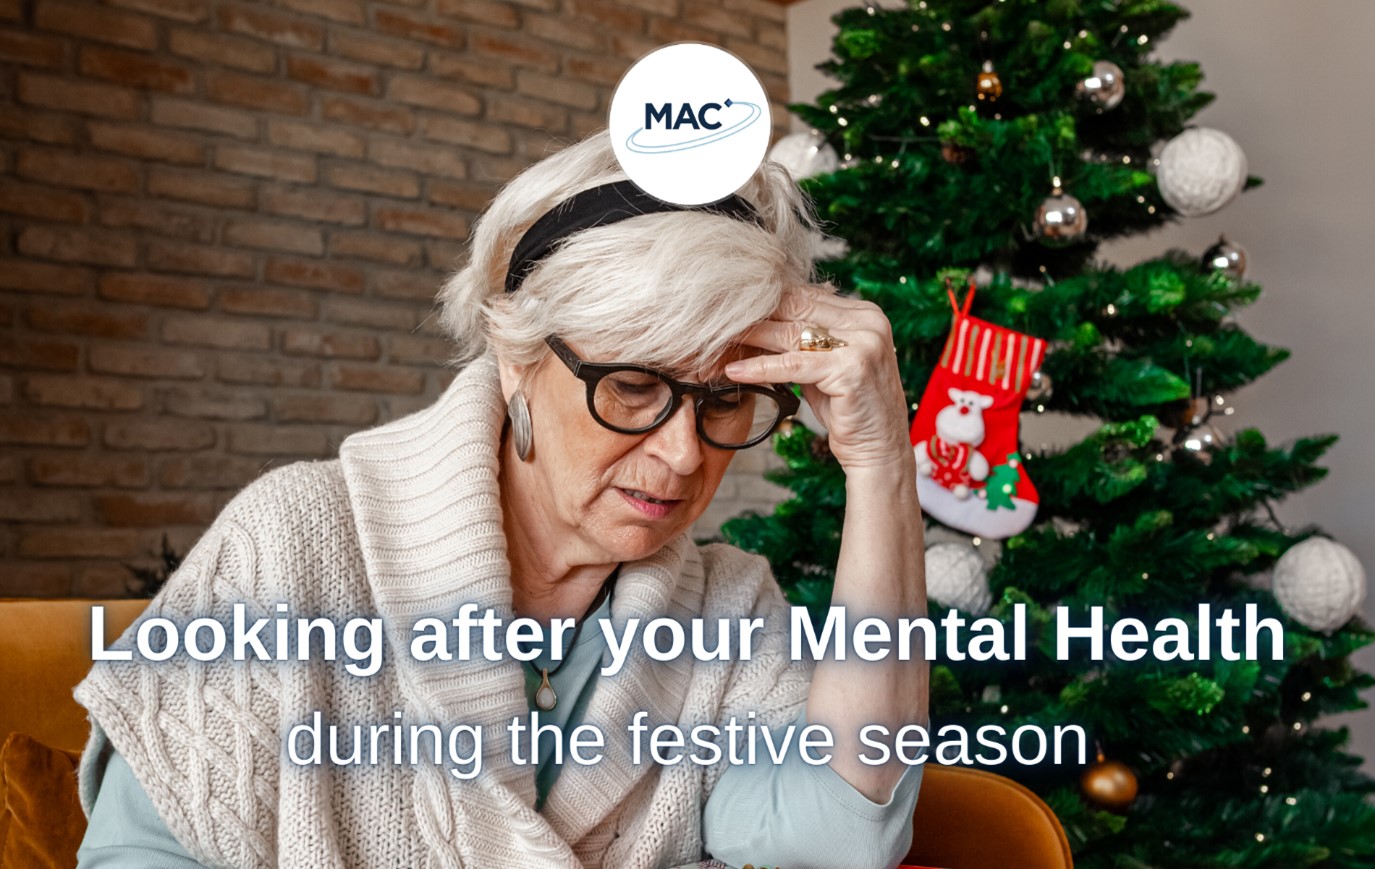 Looking after your mental health during the festive season